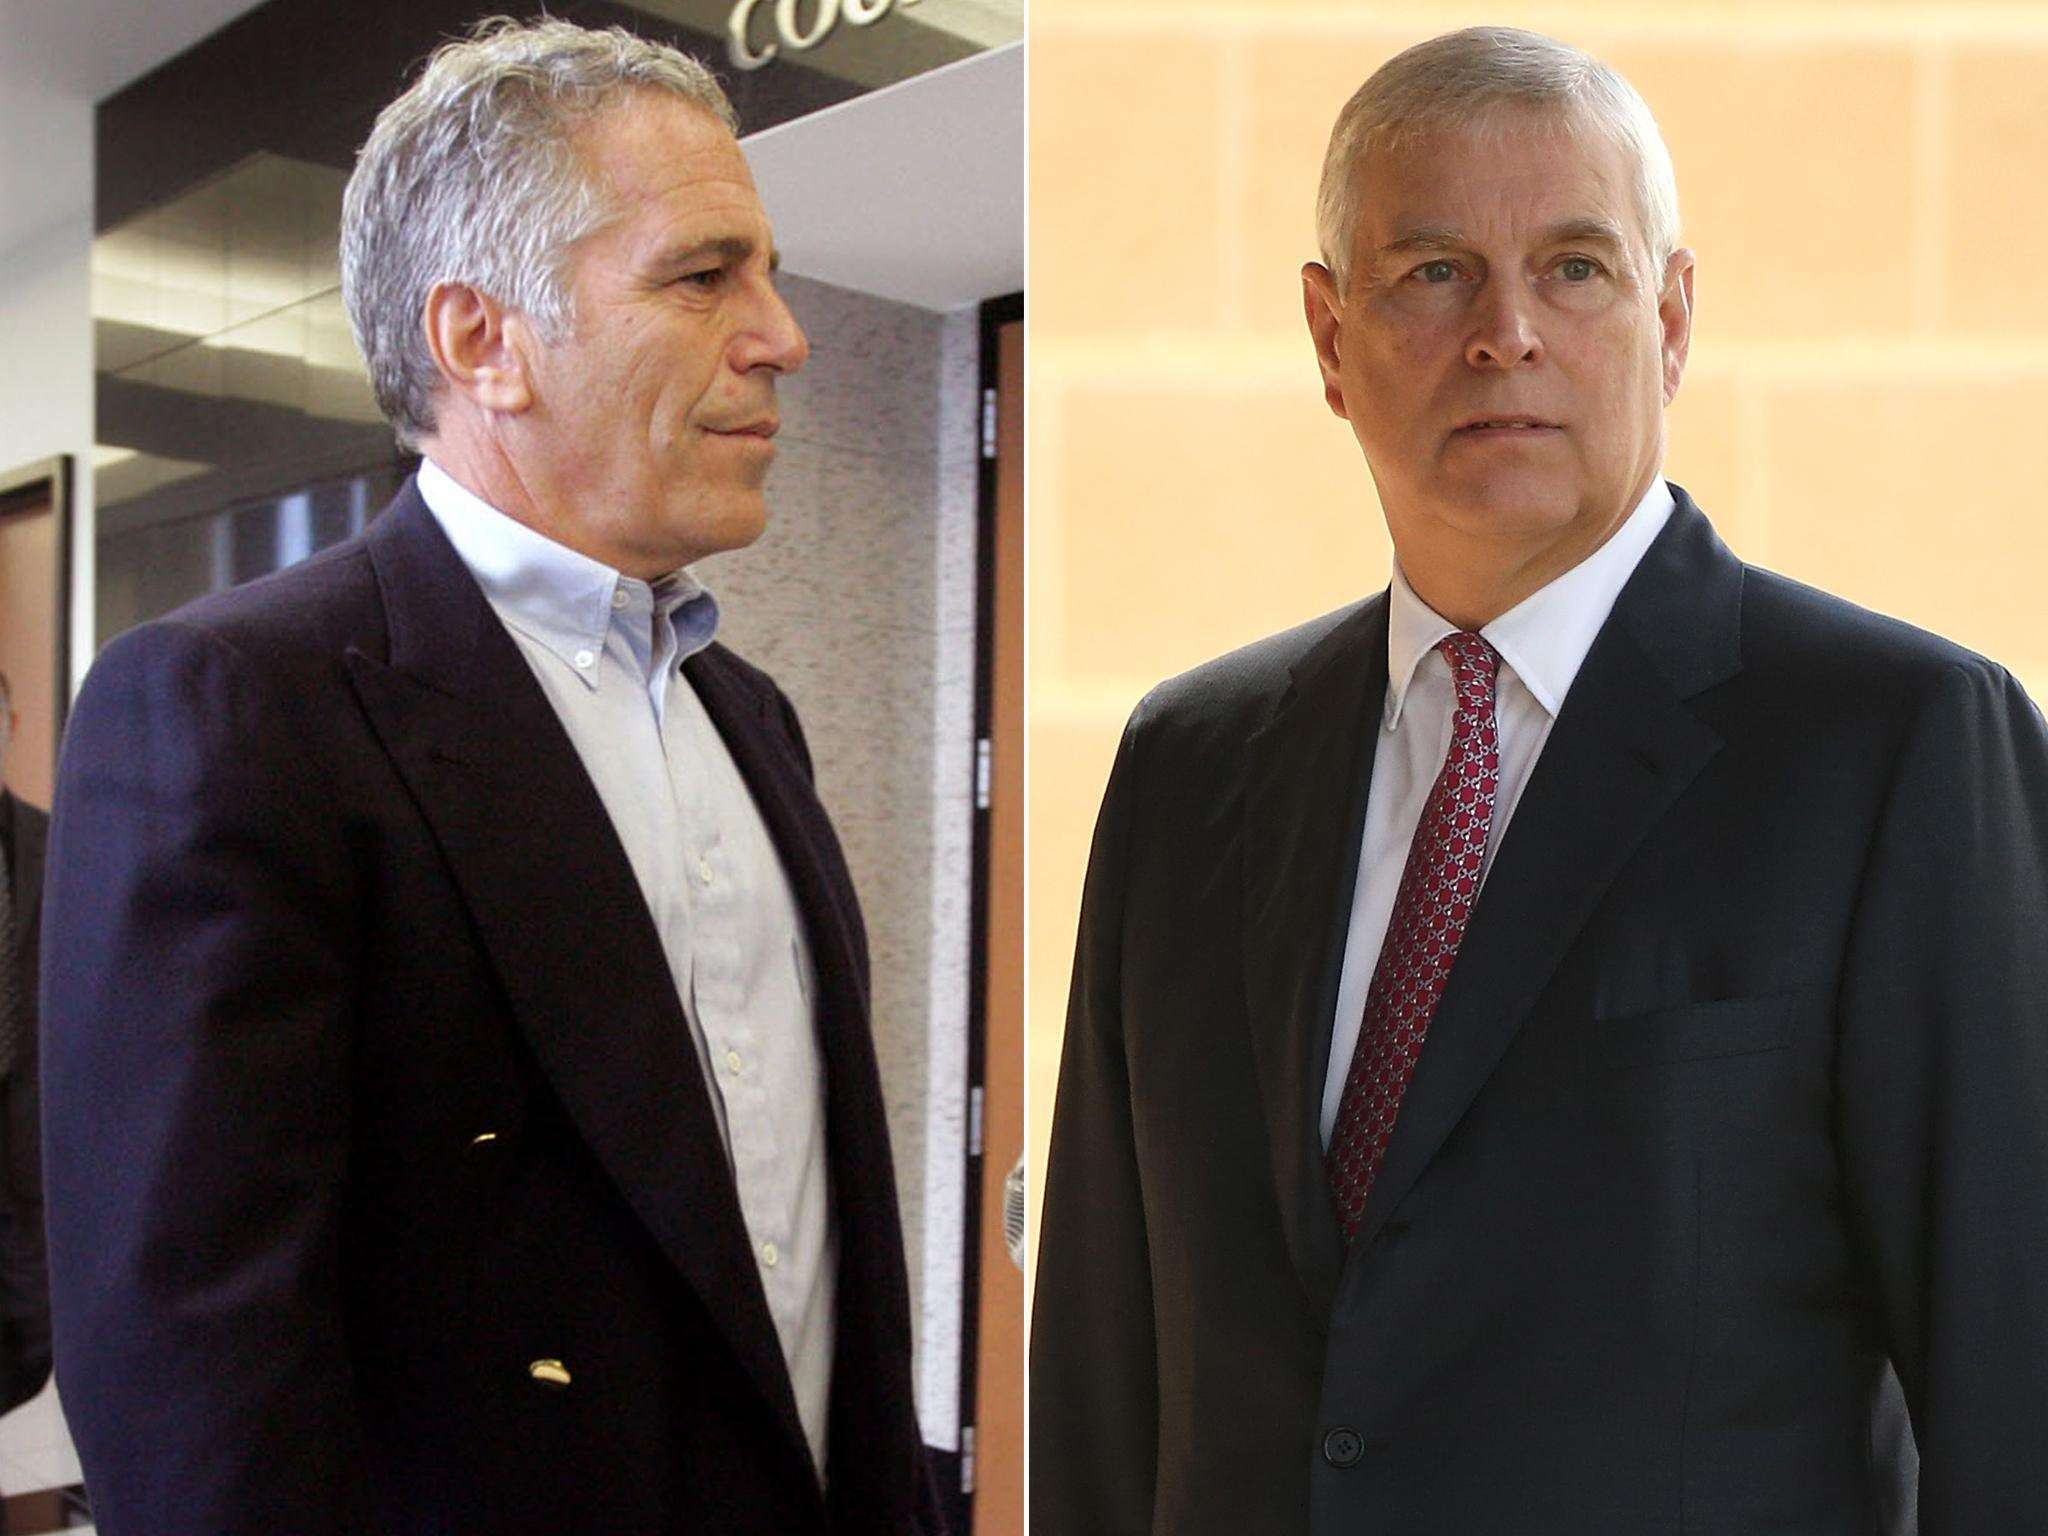 image for Prince Andrew lobbied US government for better plea deal for Jeffrey Epstein, newly released Ghislaine Maxwell documents claim